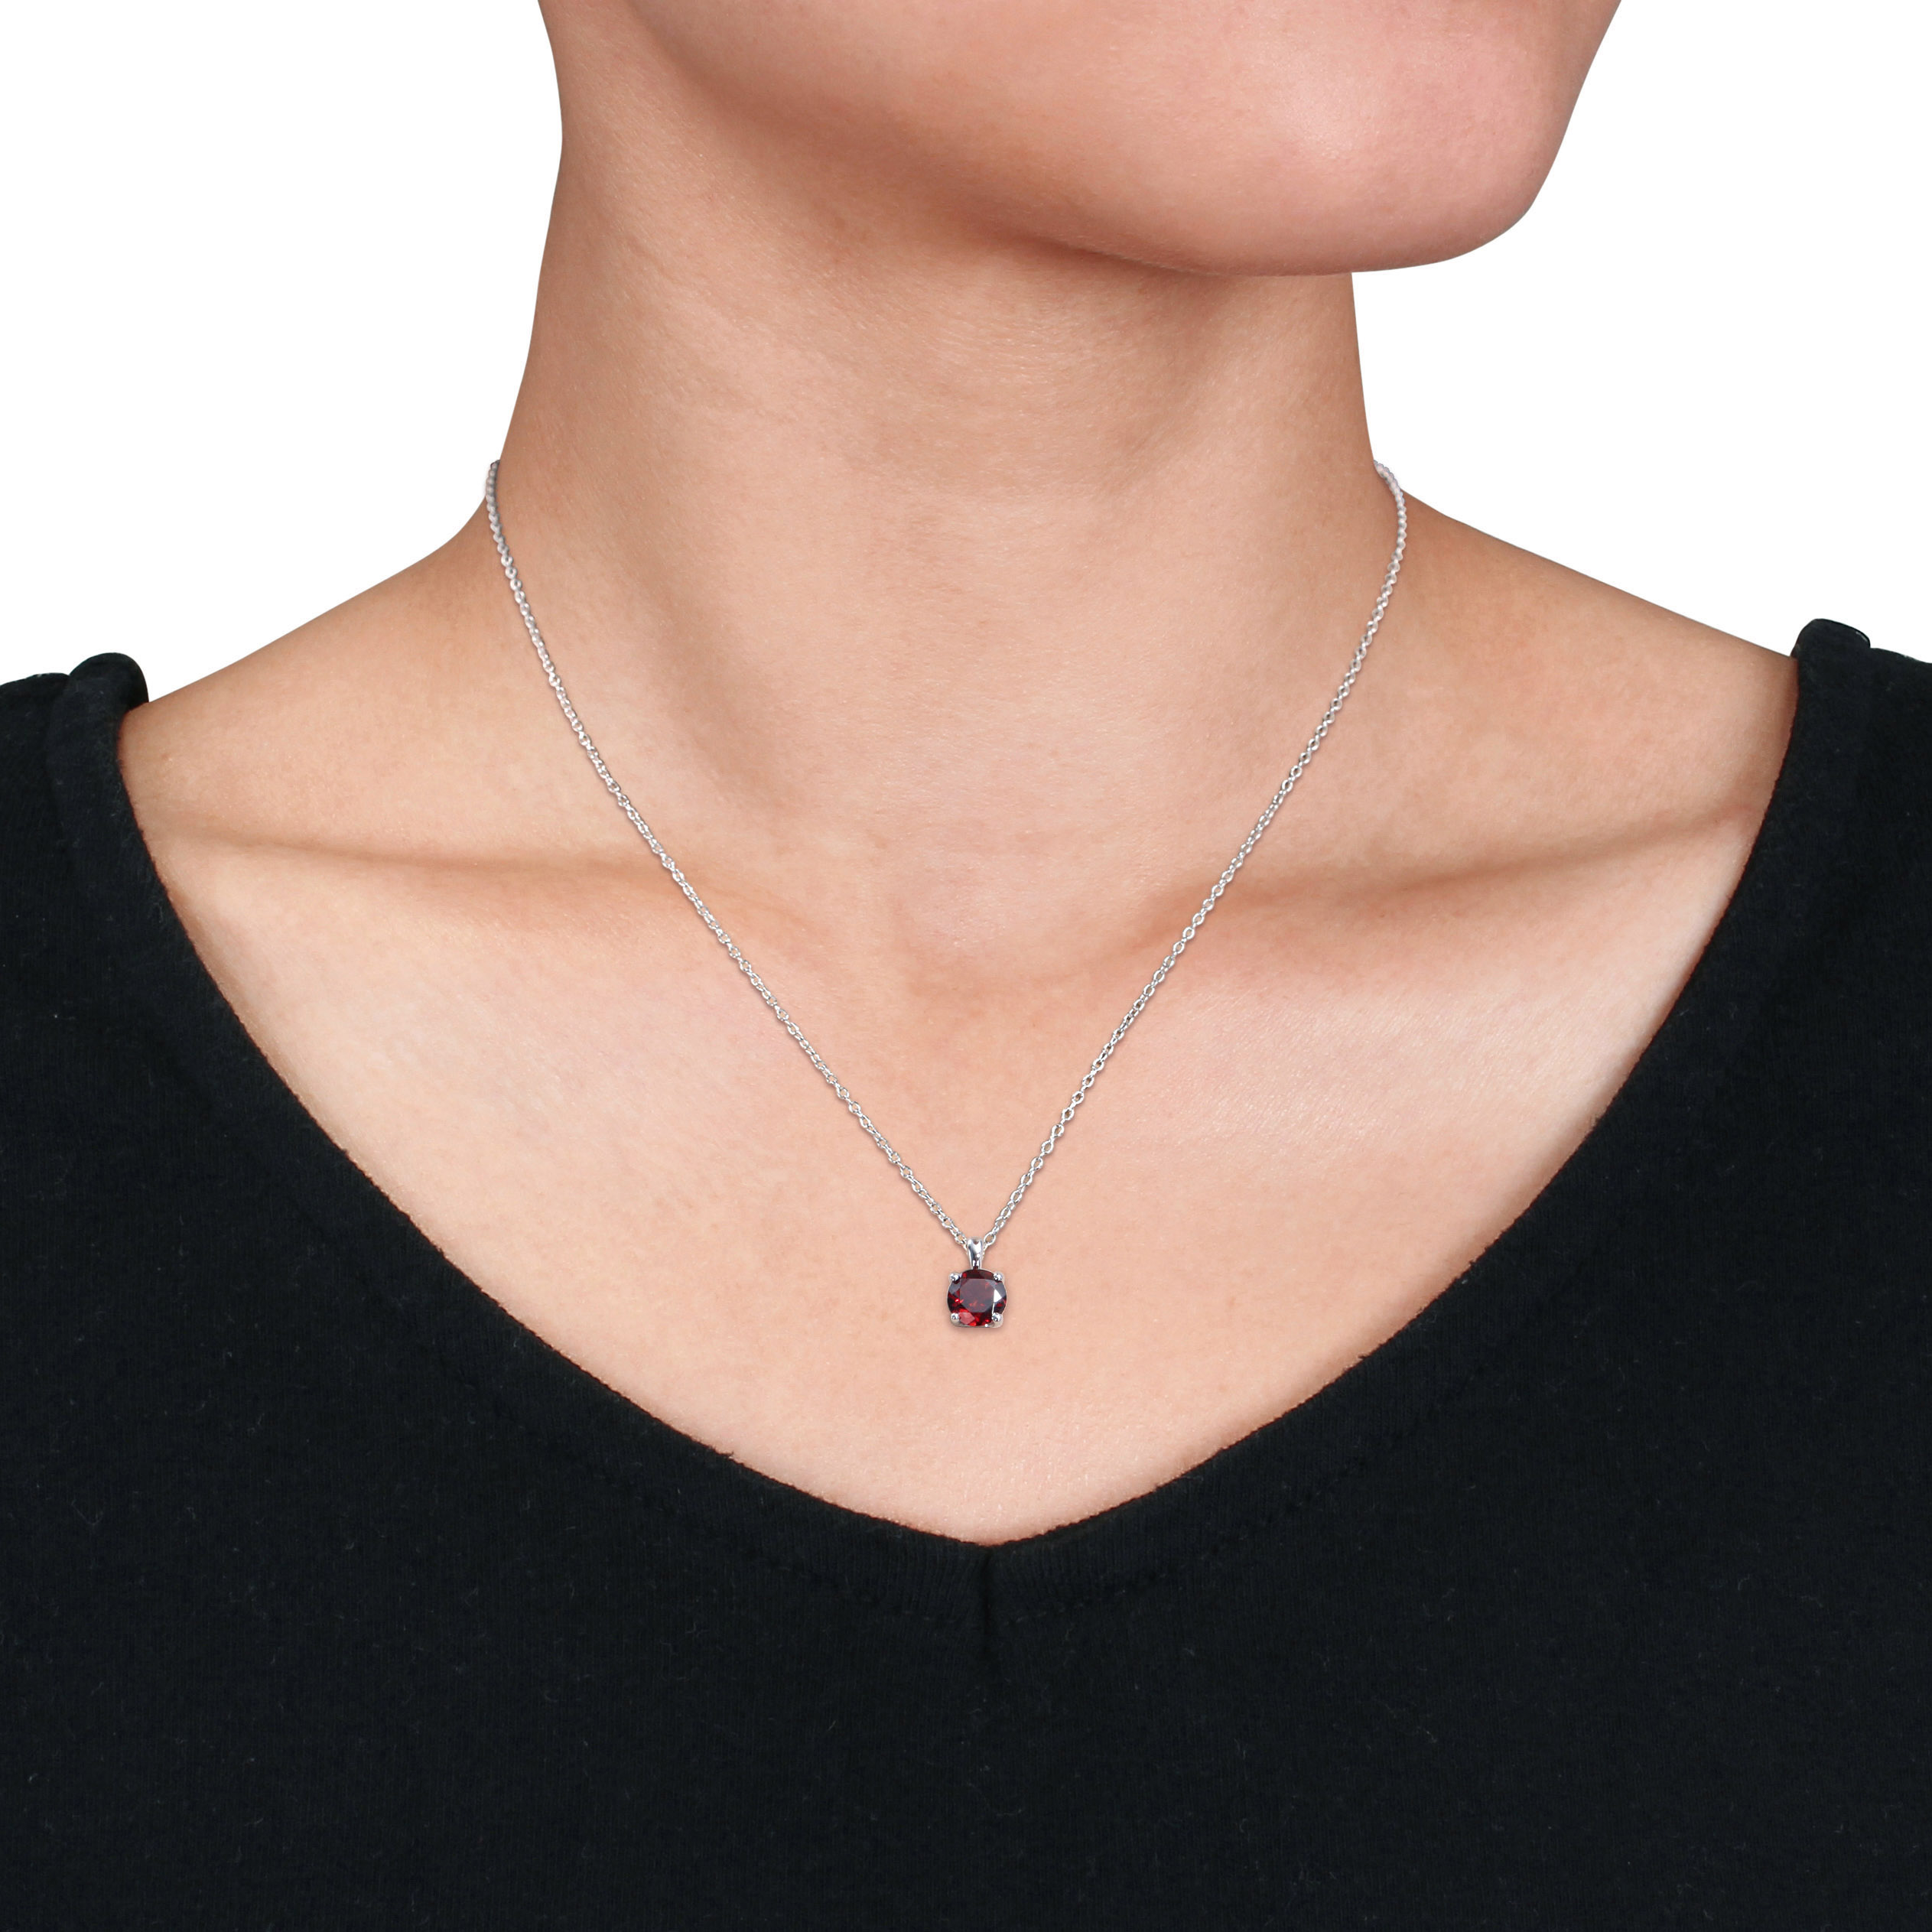 1 5/8 CT TGW Garnet Solitaire Pendant with Chain in Sterling Silver